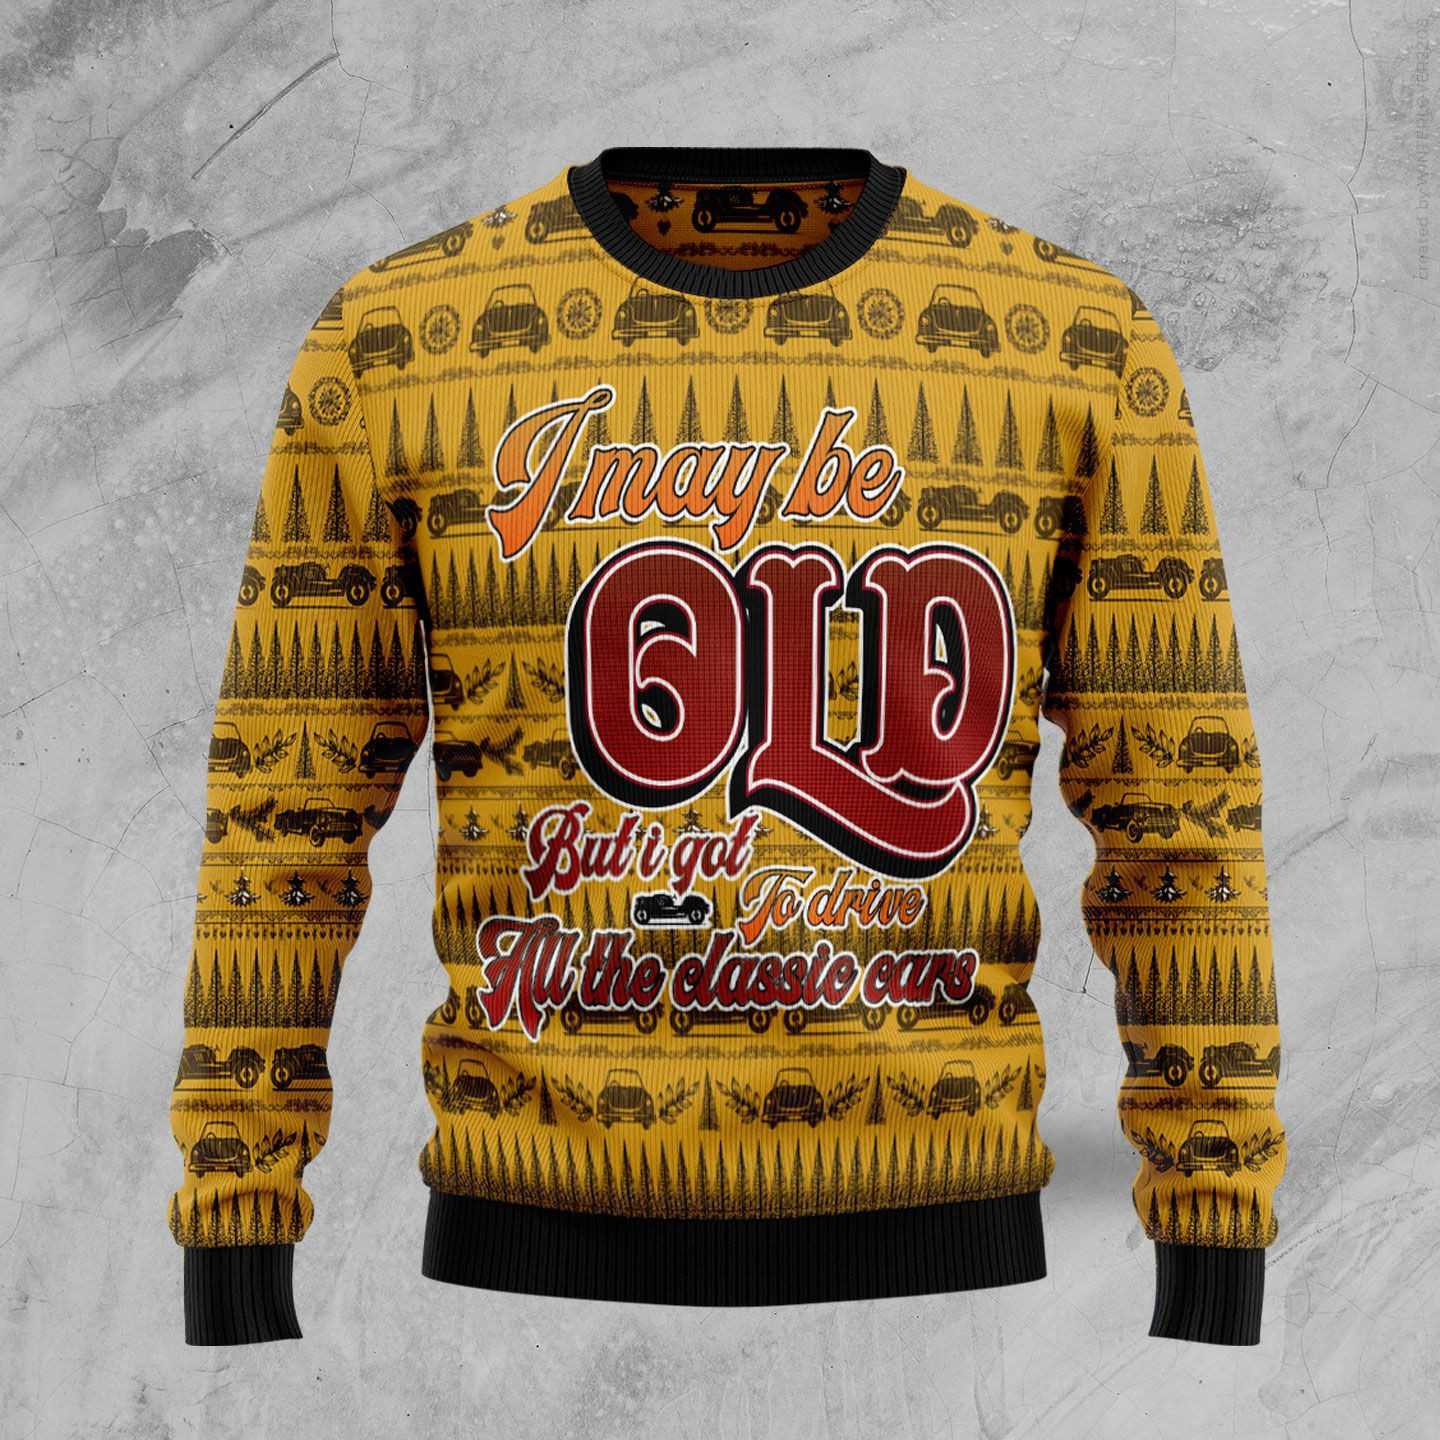 I Got To Drive All The Classic Cars Ugly Christmas Sweater Ugly Sweater For Men Women